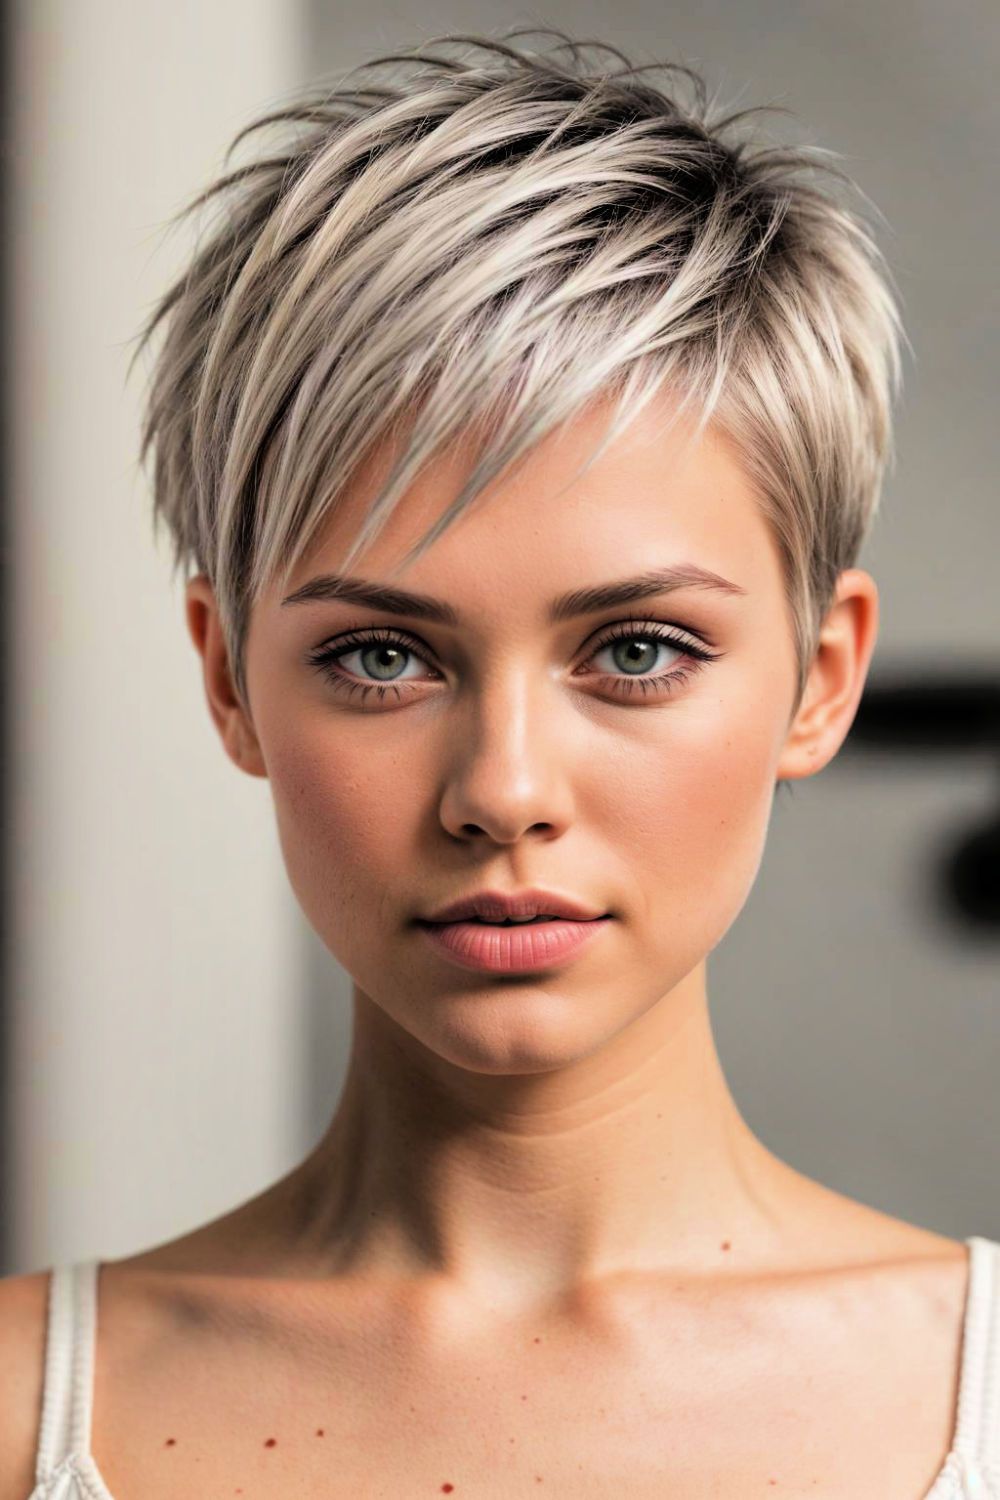 tousled pixie hairstyle